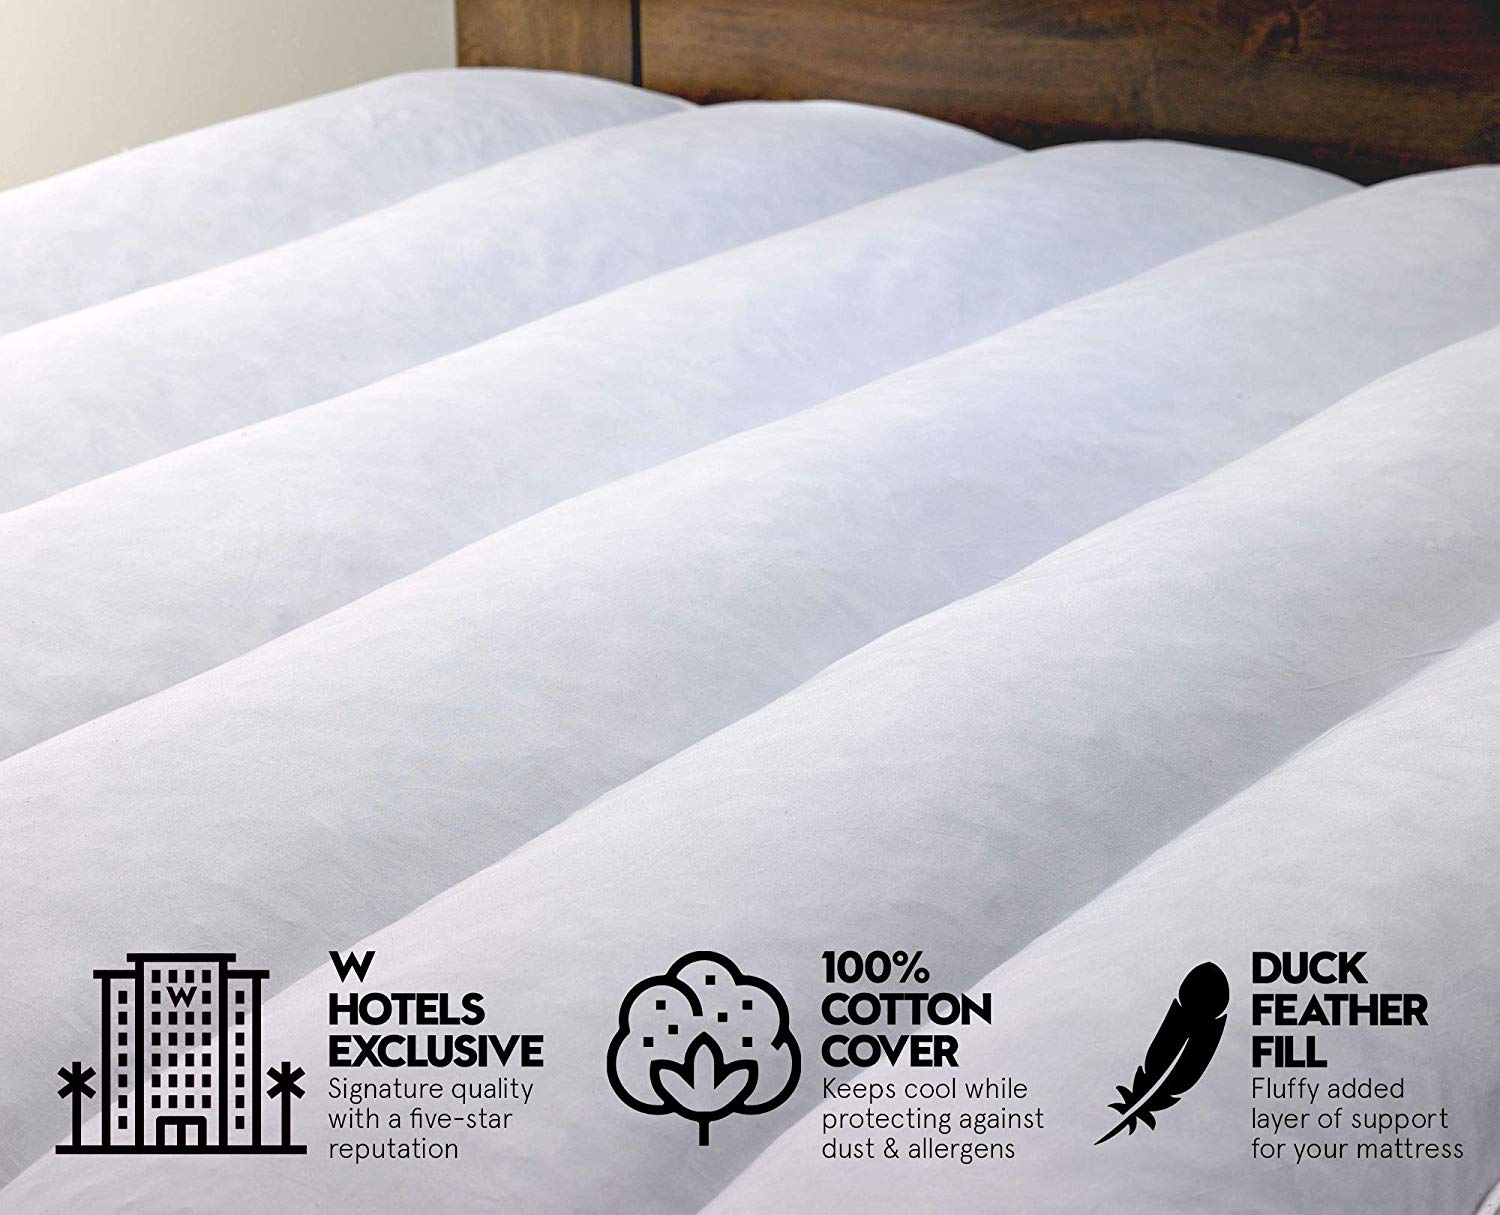 the features of a W Hotel featherbed